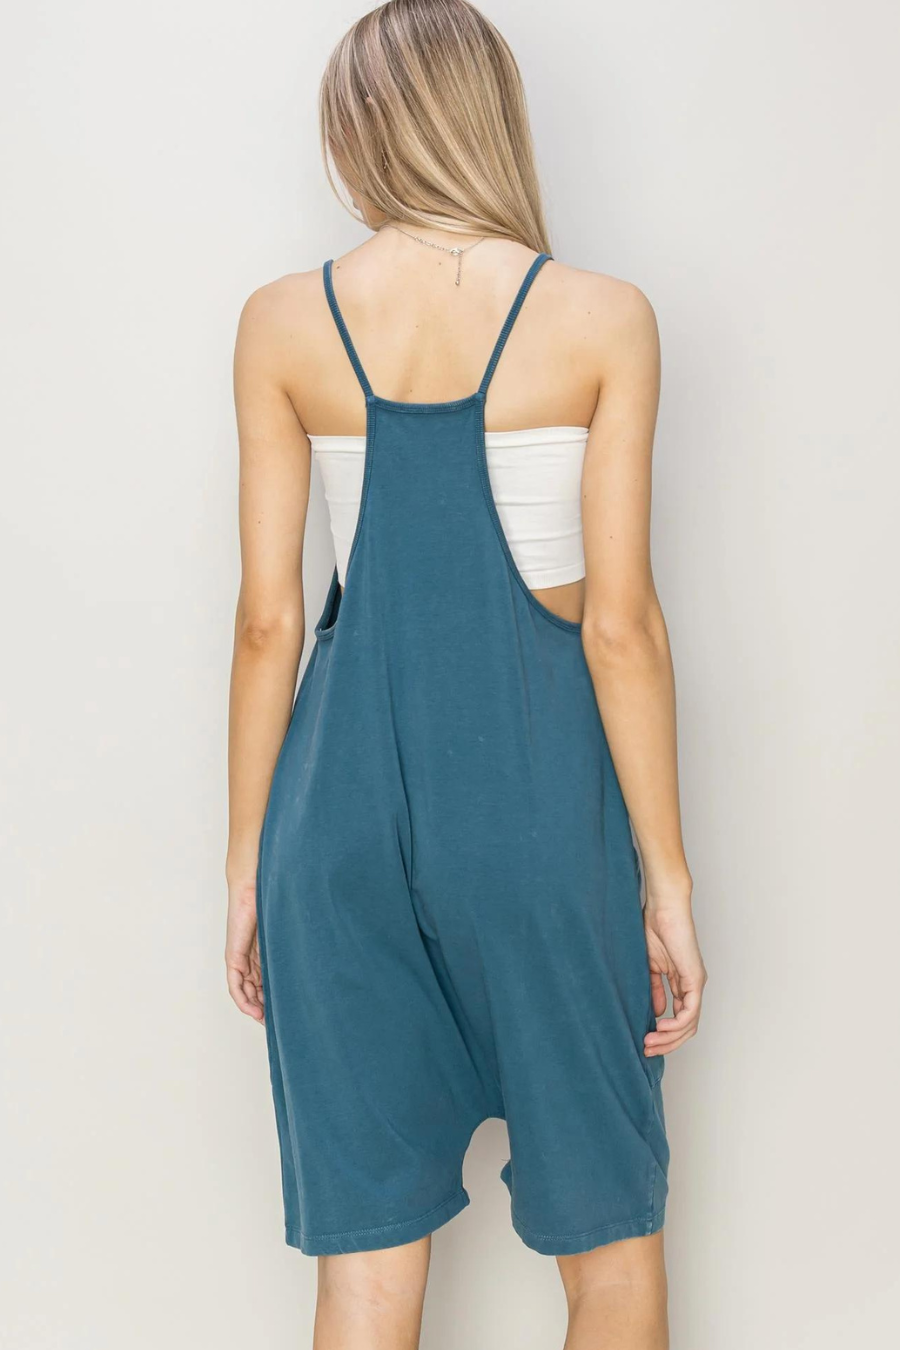 back view of the franny mineral washed romper in teal with a white cami under it 